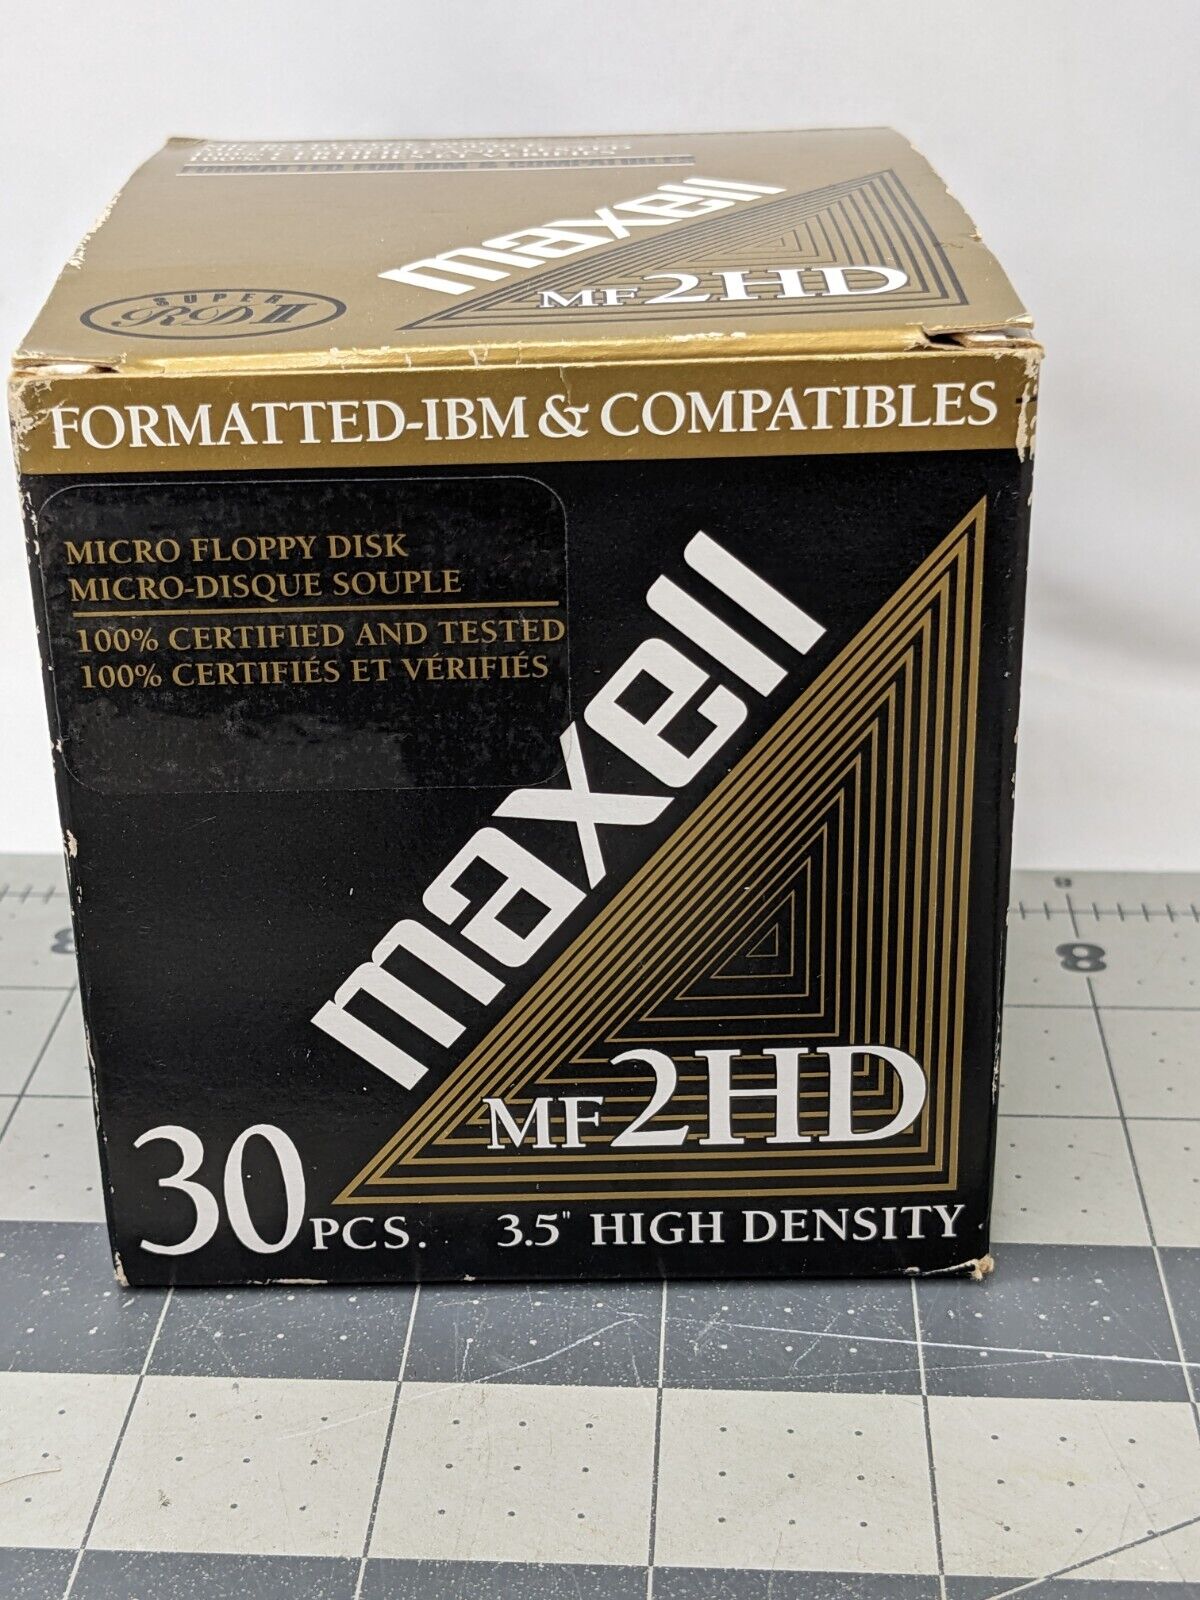 Maxell MF2HD 3.5 Inch Micro Floppy Disks 2HD Formatted IBM Lot of 18